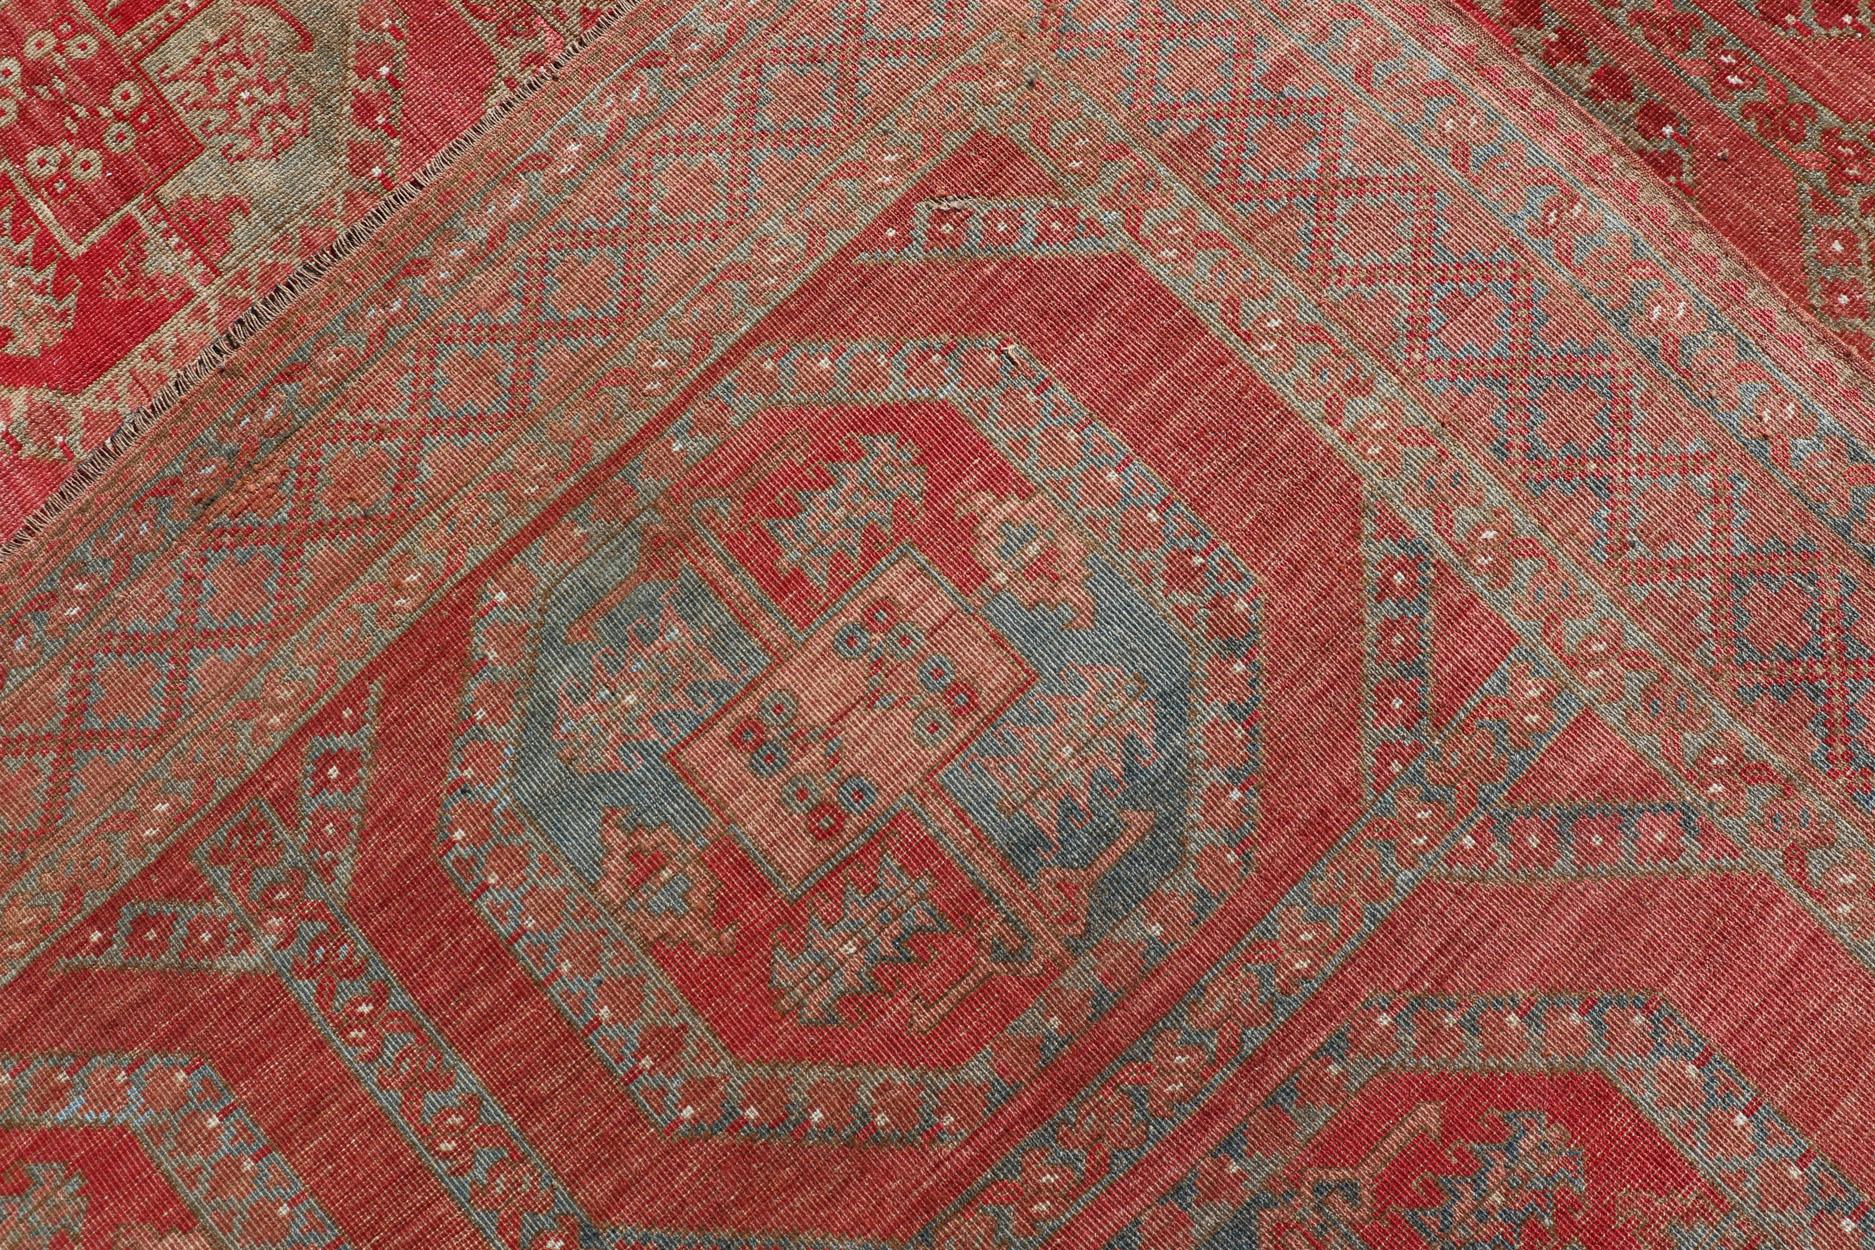 Hand-Knotted Wool Ersari Rug in Wool with Gul Design in Shades of Red & Green 6